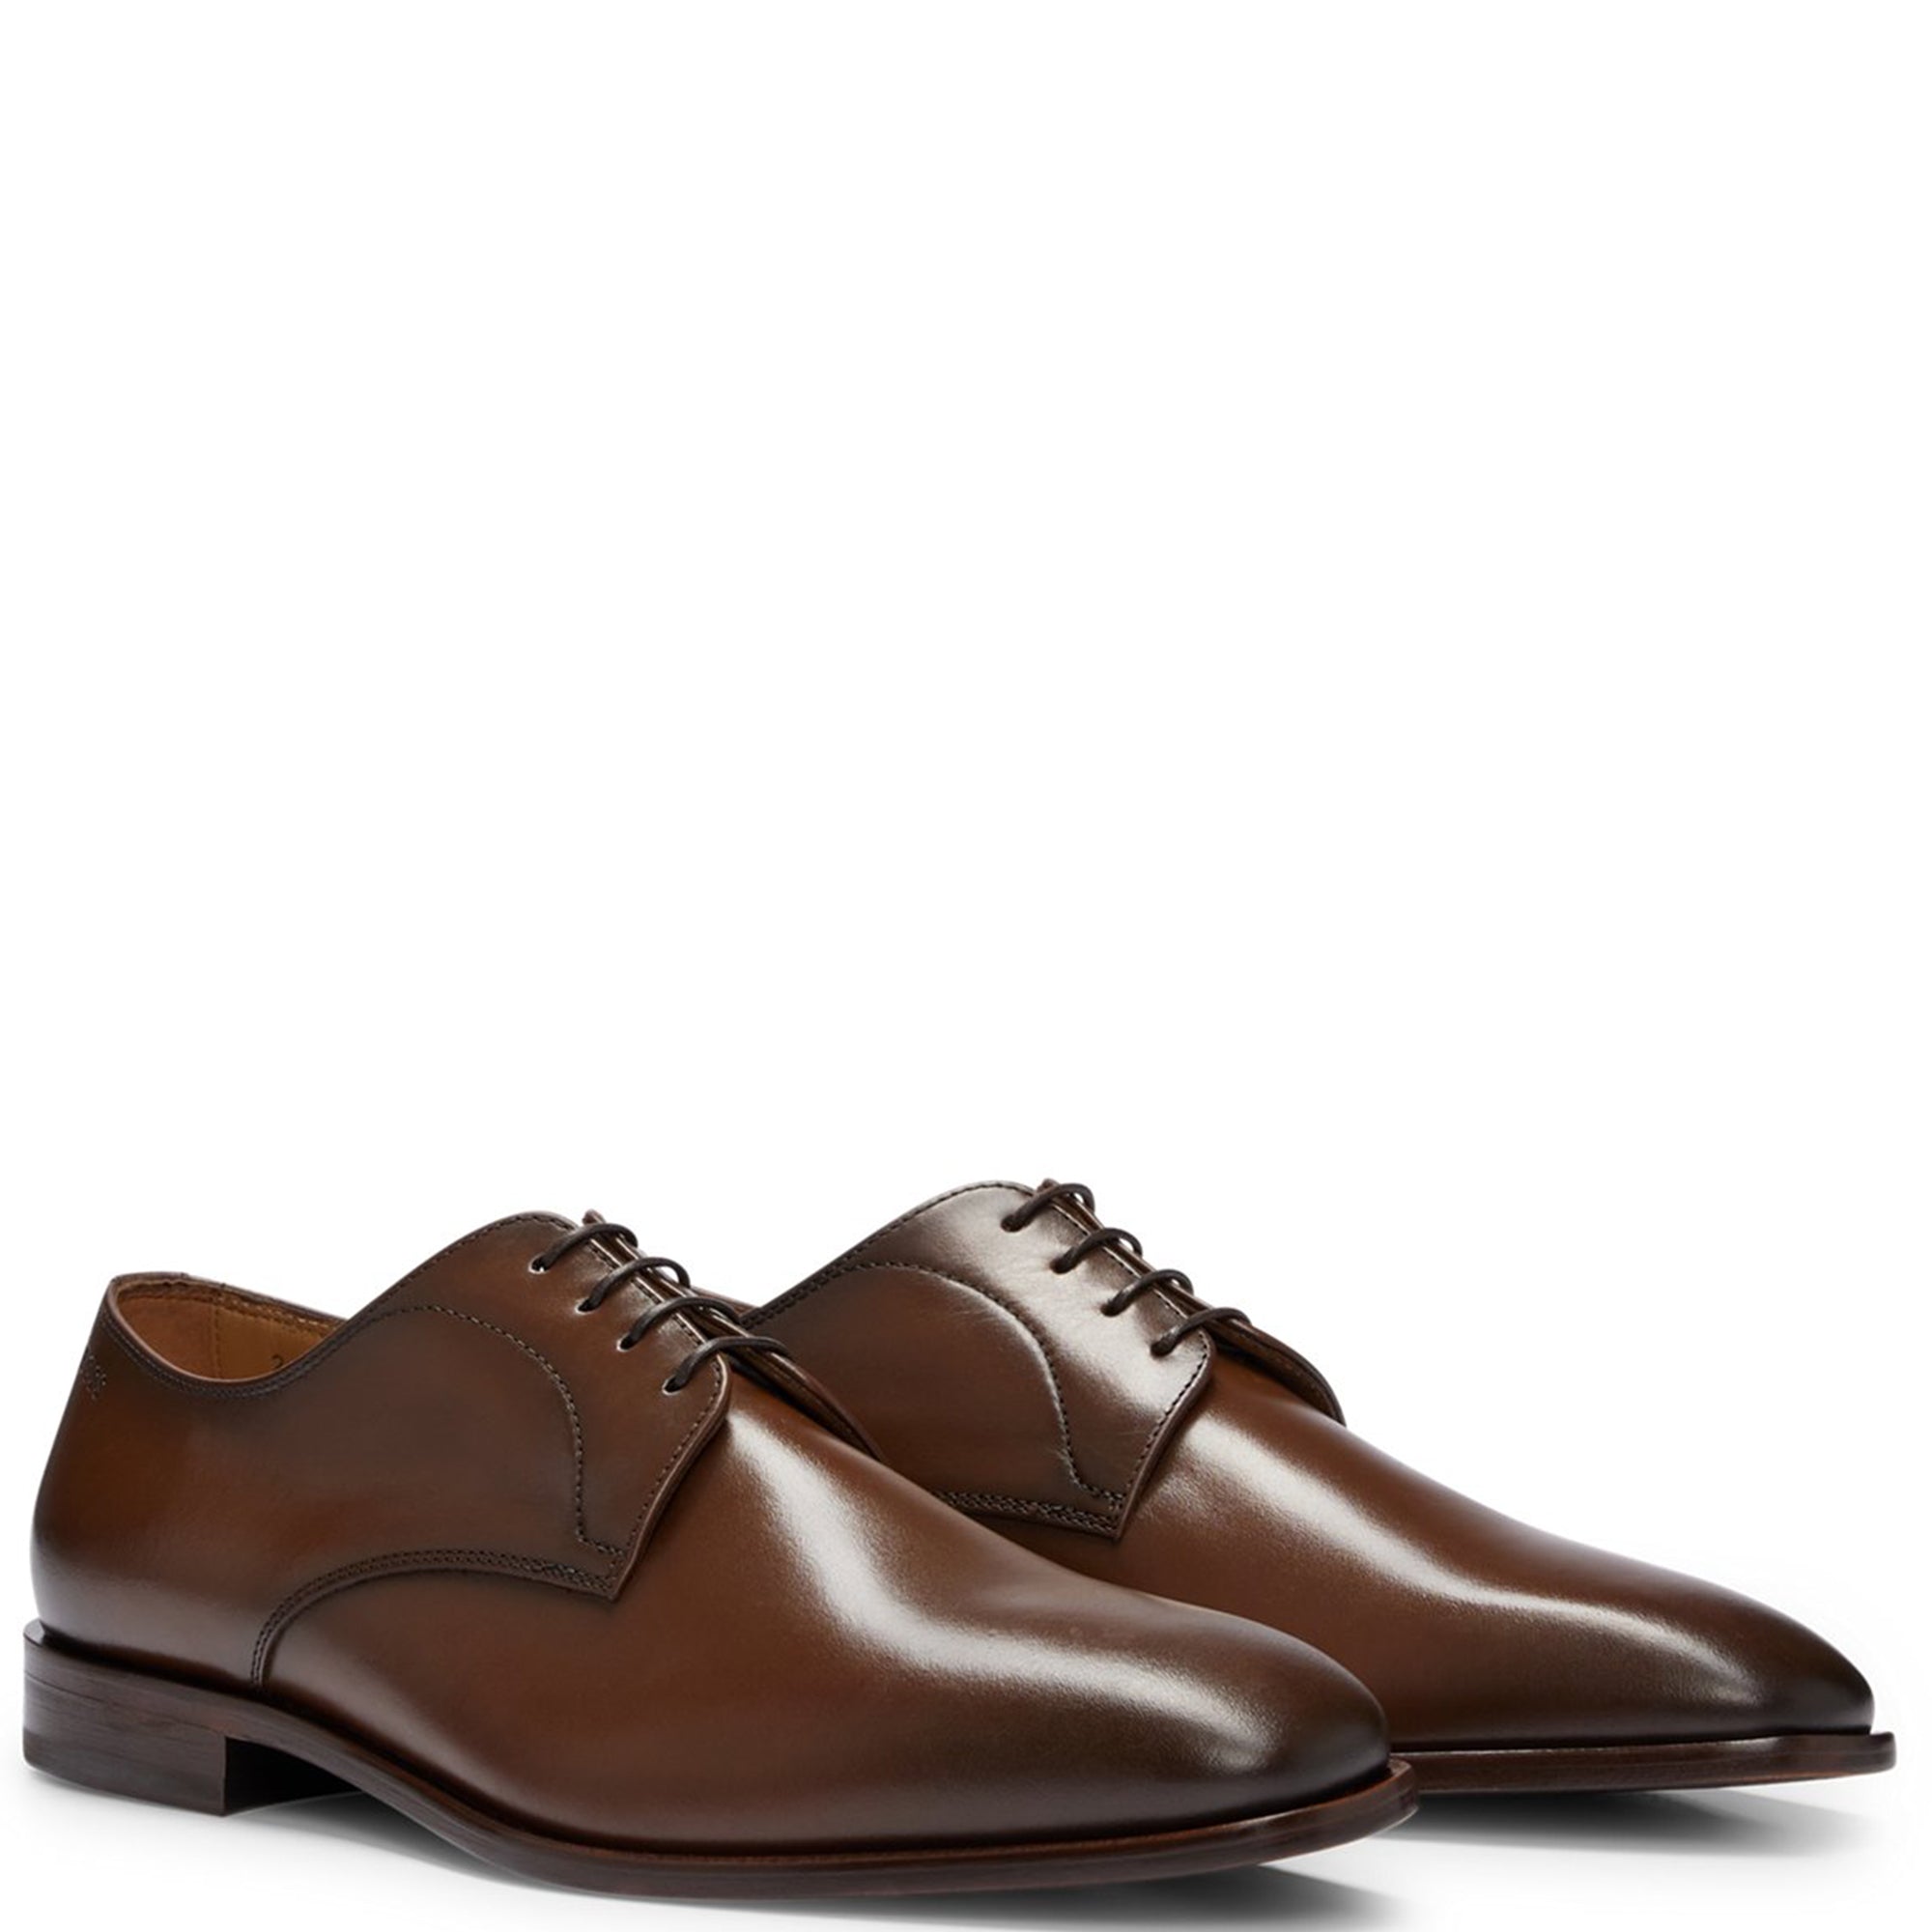 Boss Colby Derby Shoes Brown UK 9